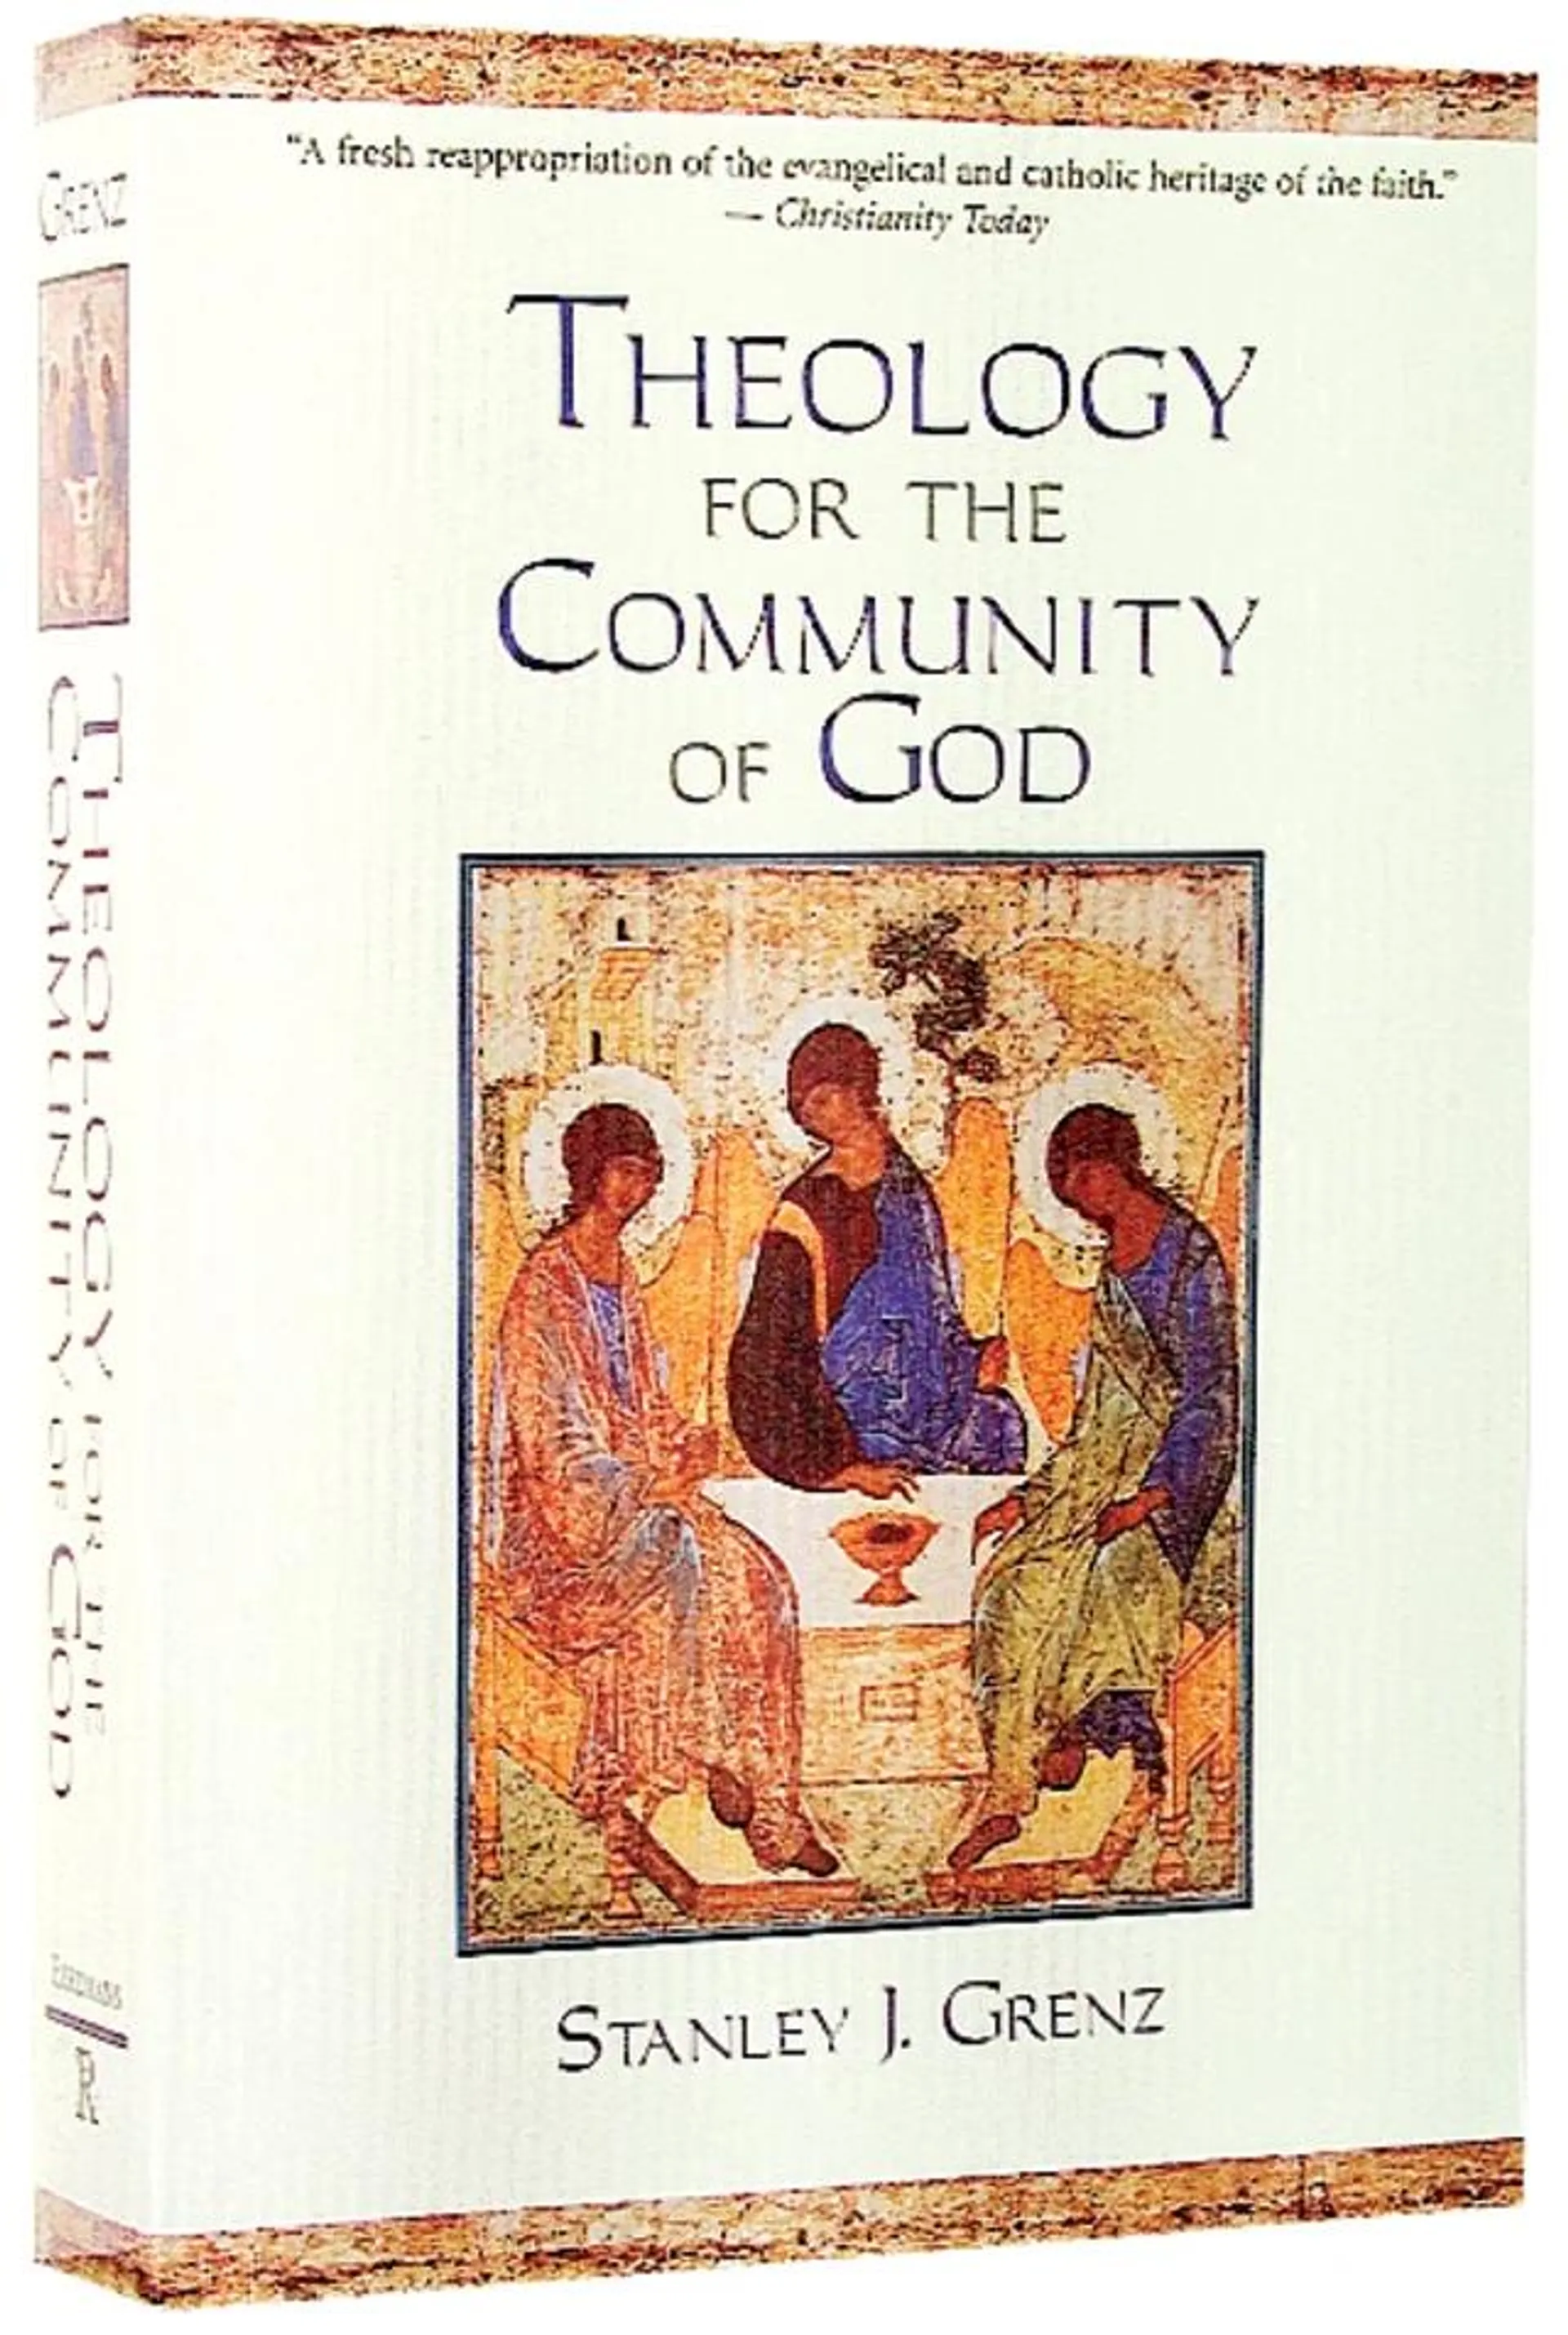 Theology For the Community of God